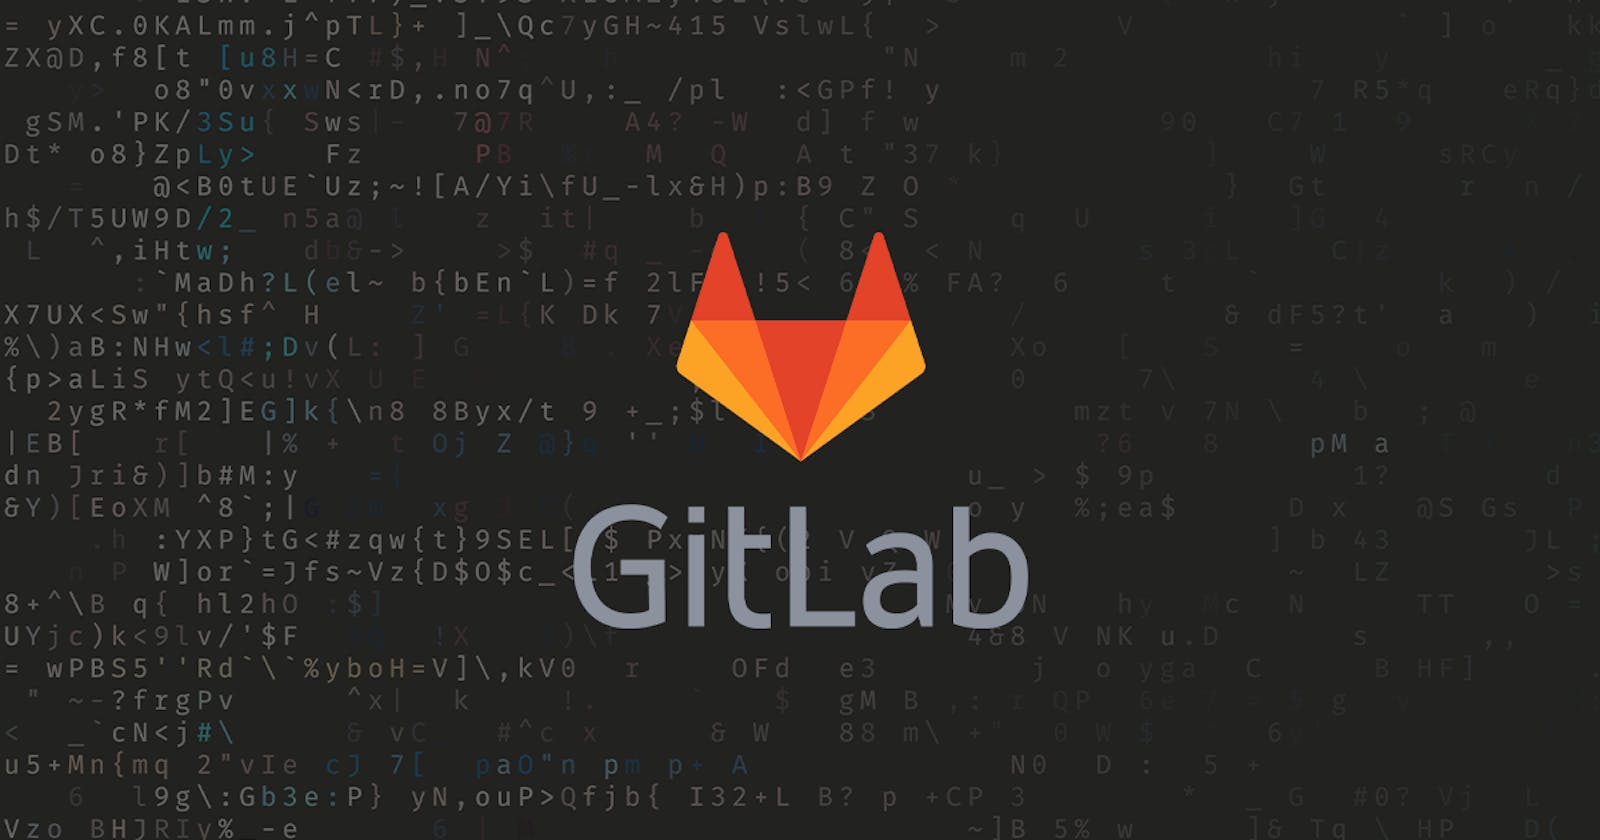 "Initiating Professional Development: Crafting First Project on GitLab"